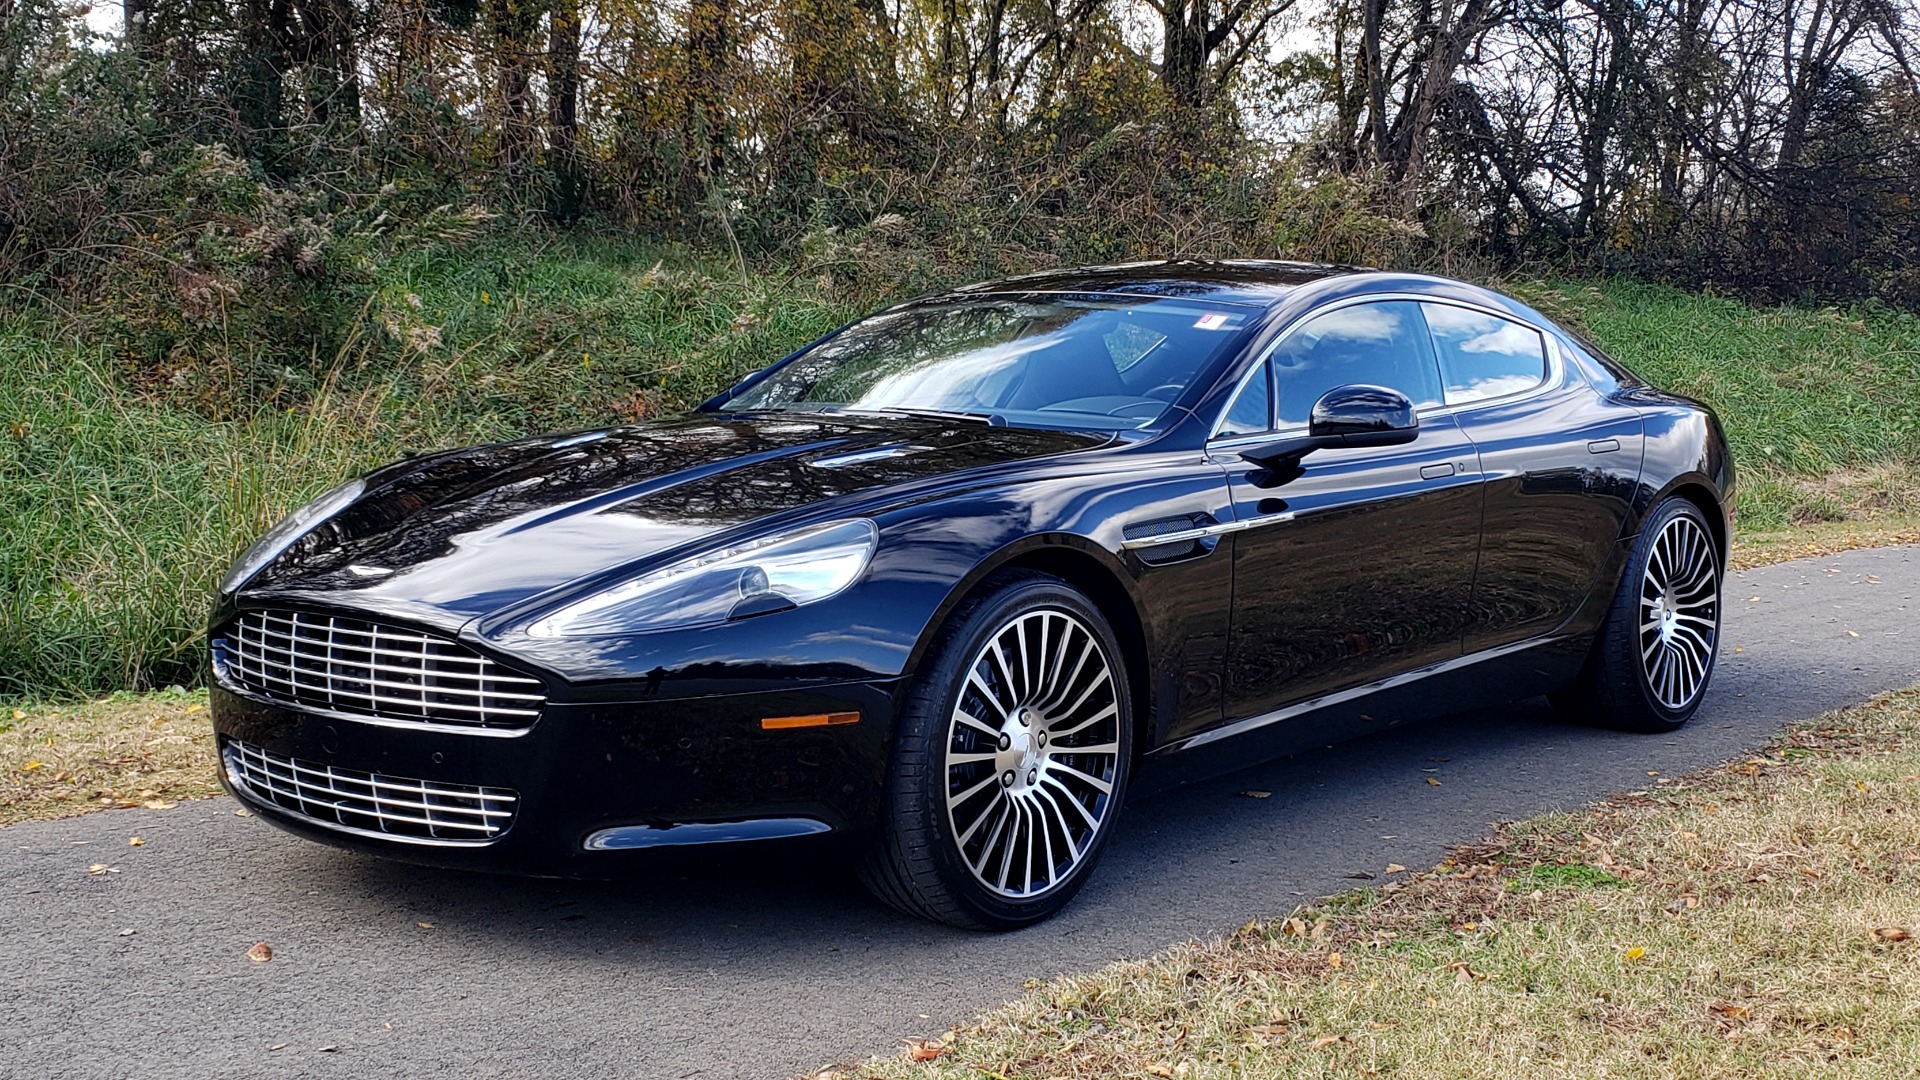 Used 2012 Aston Martin RAPIDE LUXURY 6.0L V12 / NAV / B&O SND / ENTERTAINMENT / REARVIEW for sale Sold at Formula Imports in Charlotte NC 28227 1